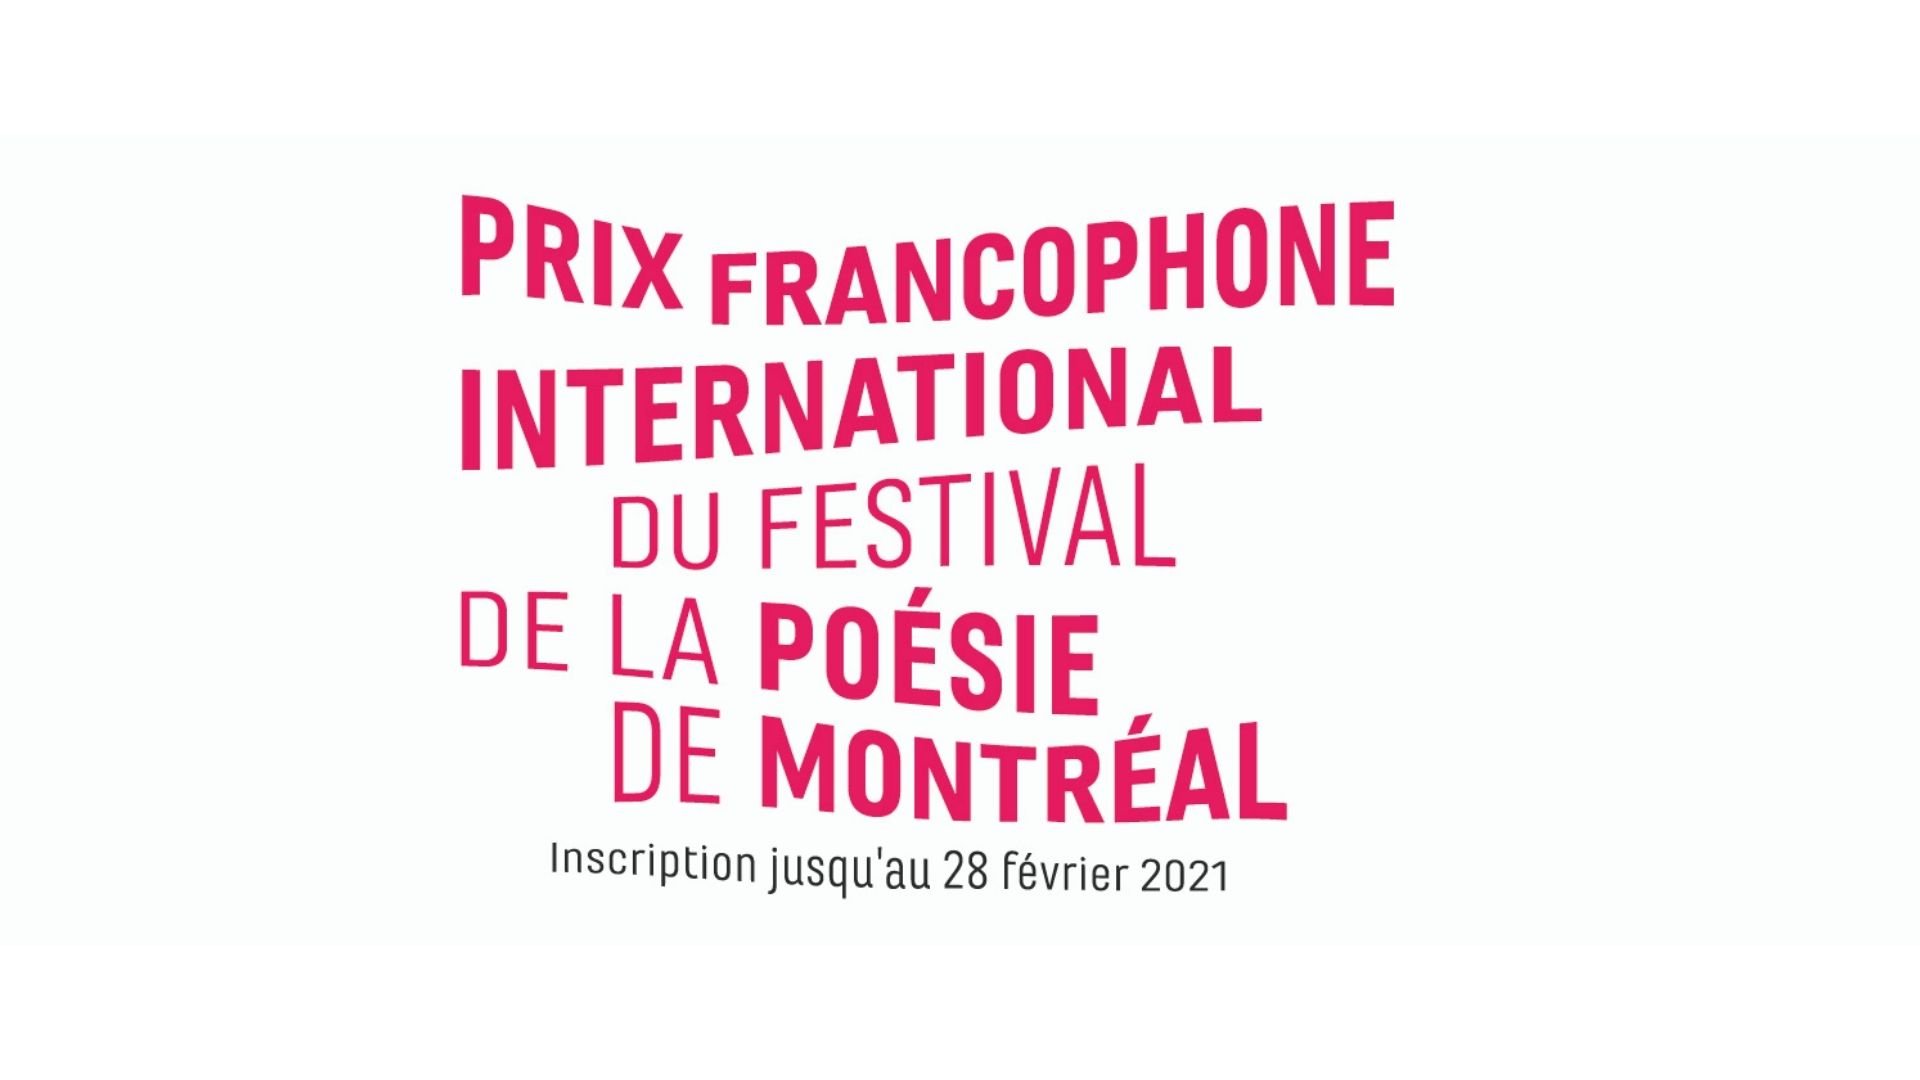 The literary prize of the Montreal Poetry Festival